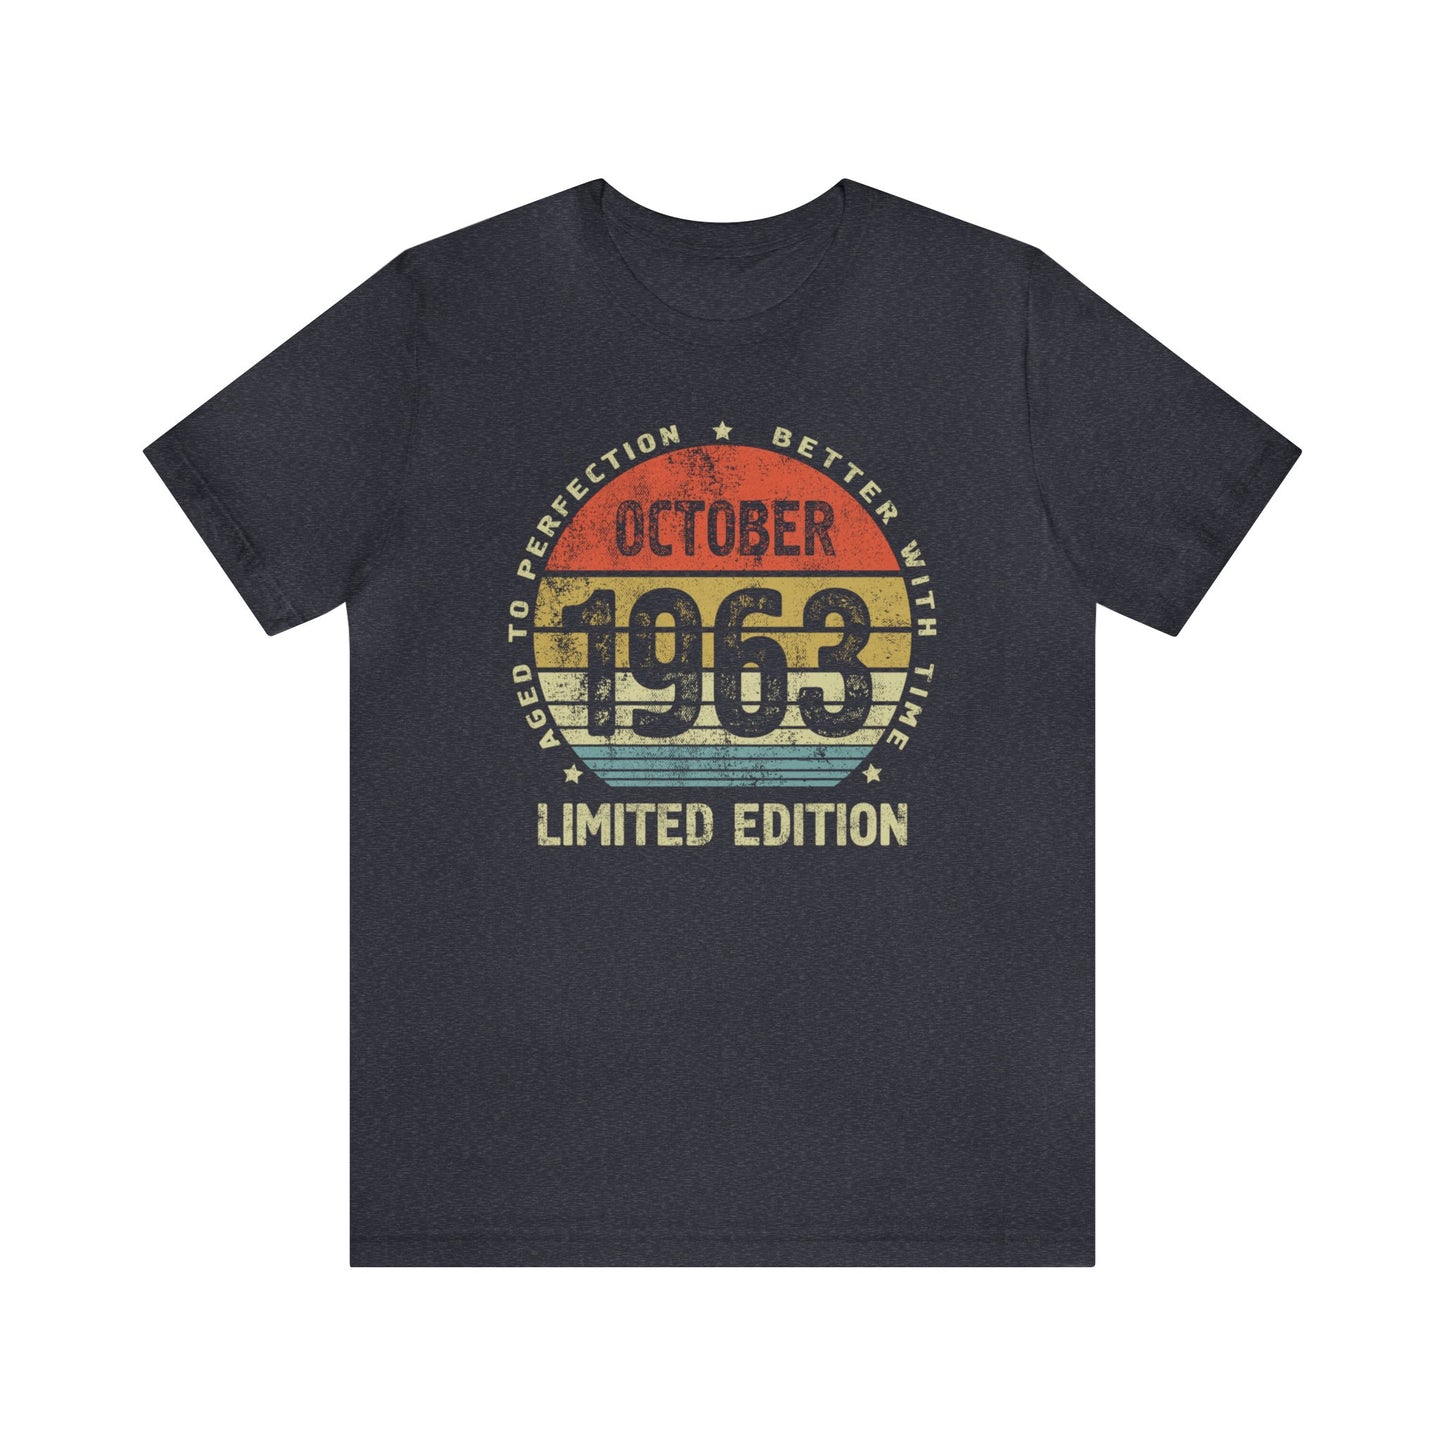 60th birthday gift for men or women October 1963 shirt for wife or husband